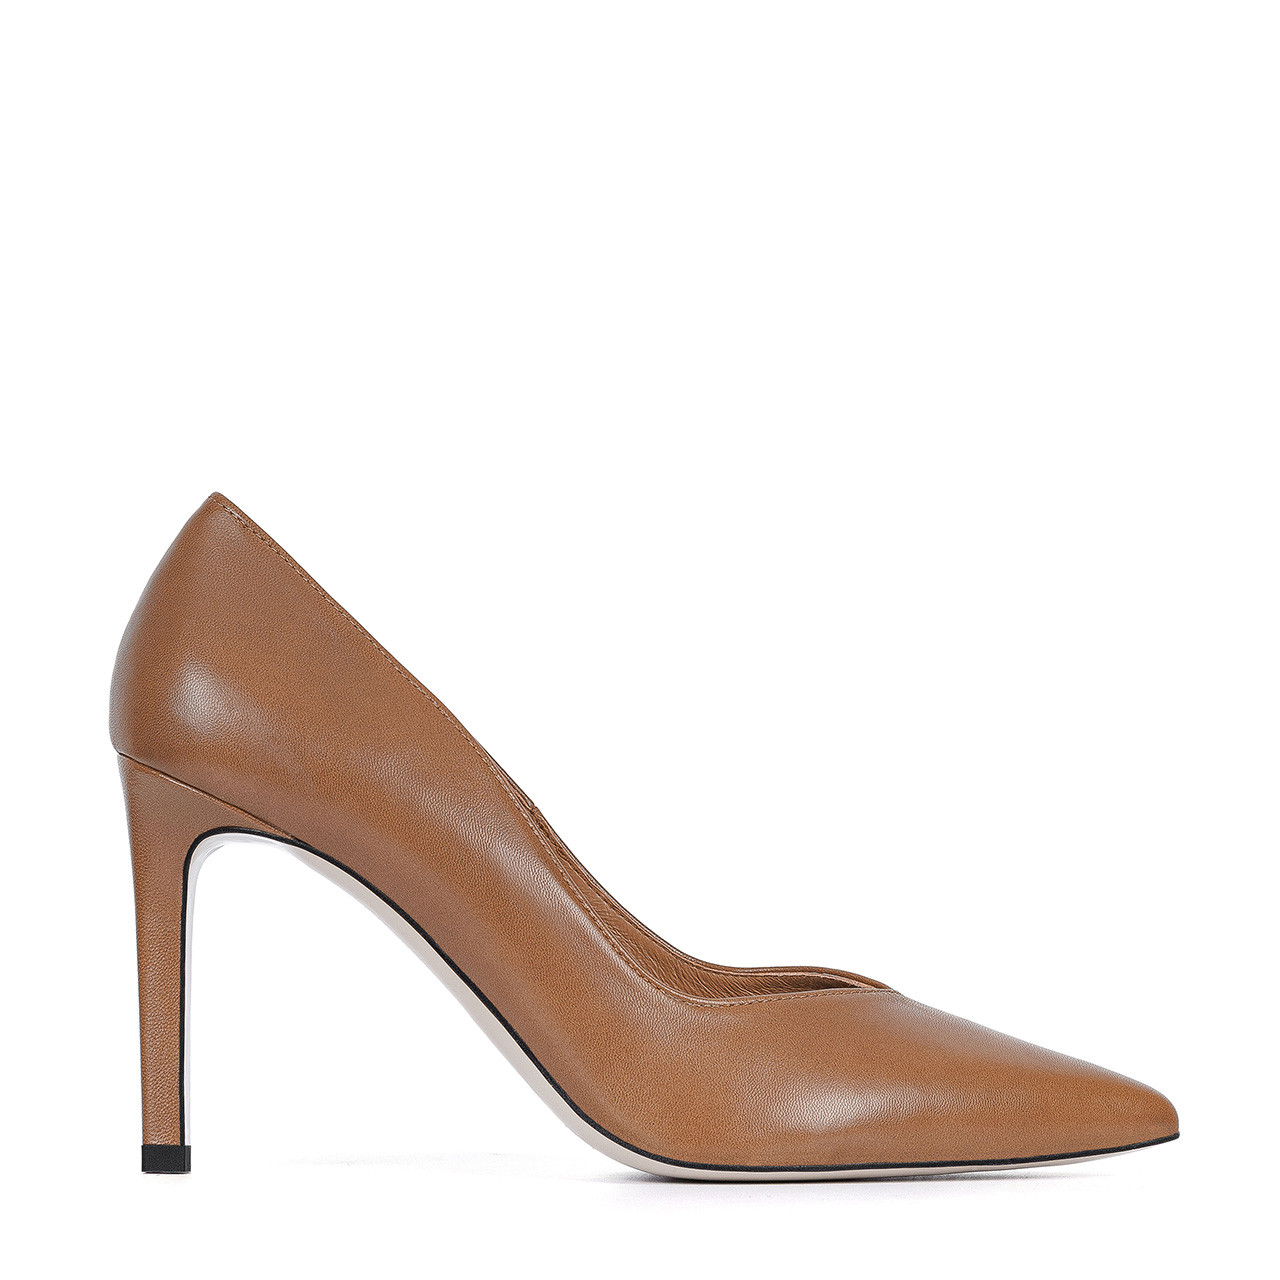 Leather brown pumps with a stiletto heel and a cutout